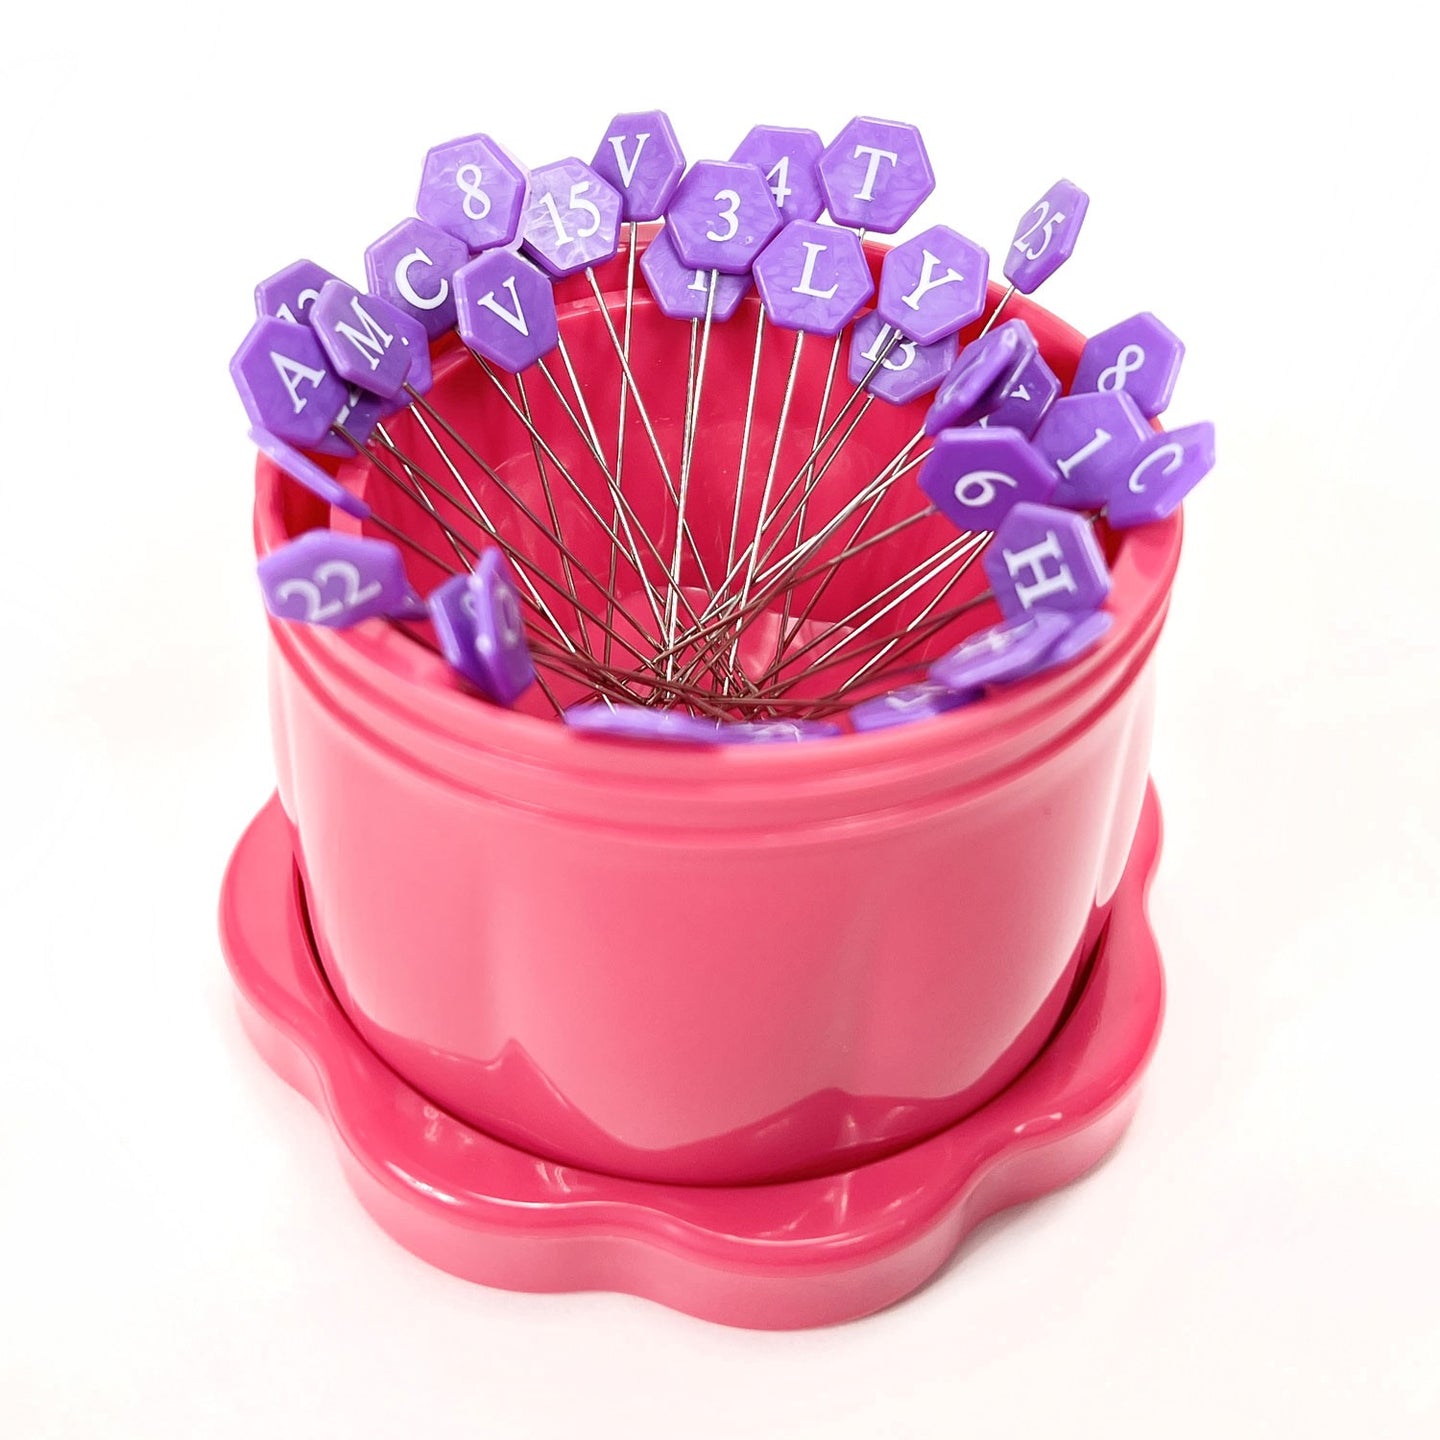 Magnetic Pin Cup- Fortune Fuchsia (LARGE)